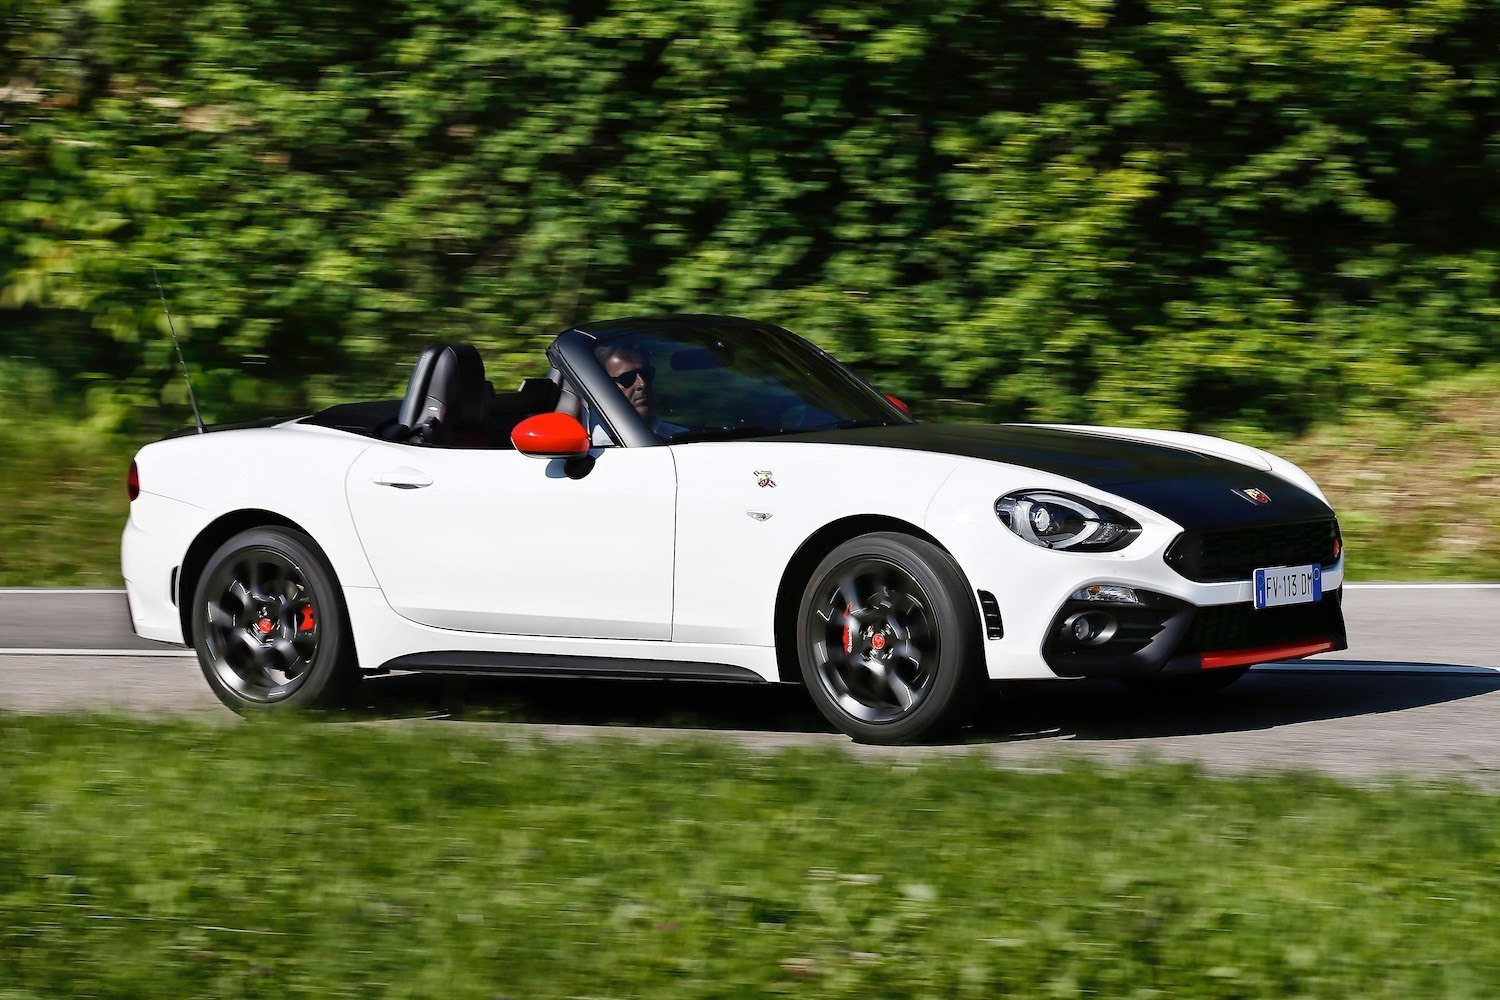 Jonathan Humphrey reviews the Abarth 124 Spider for Drive 6